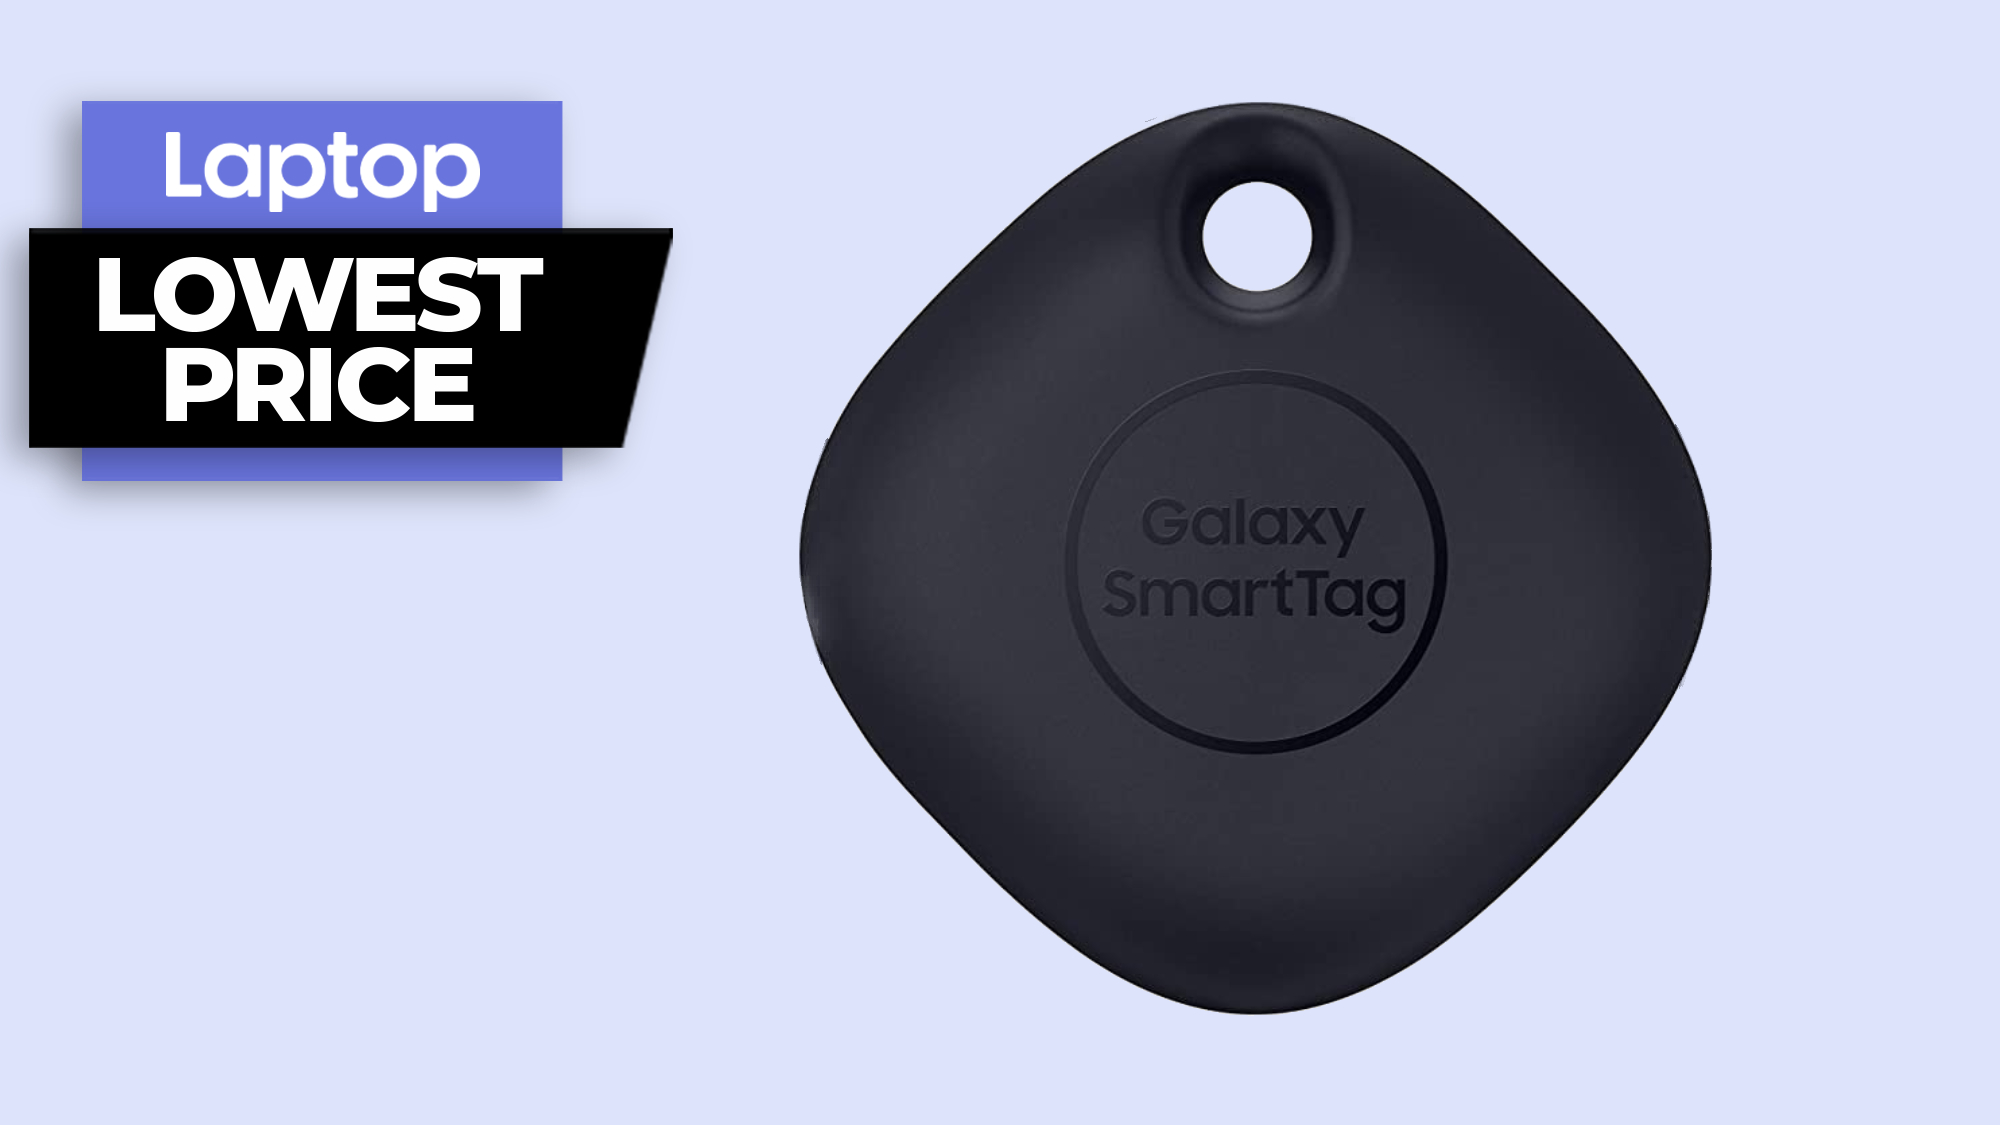 Samsung's new Galaxy SmartTag Plus is now available in the US for pre-order  -  news